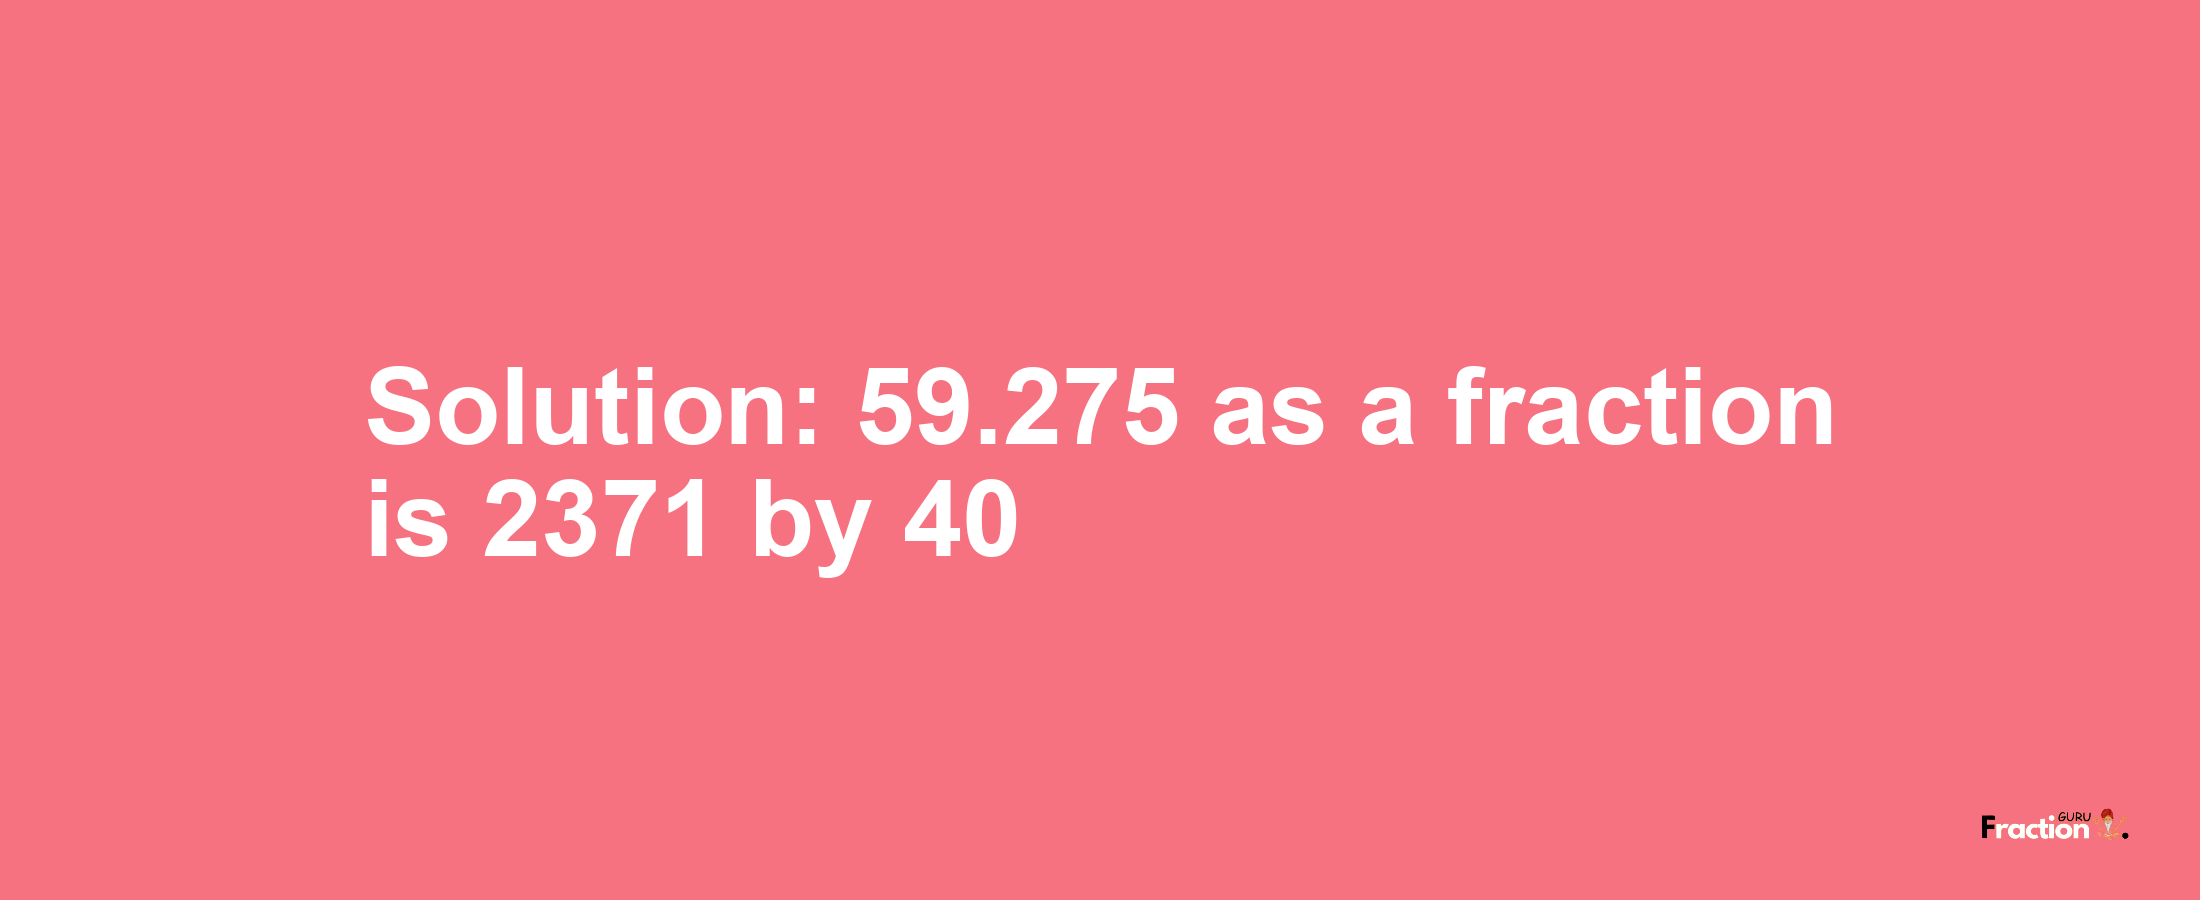 Solution:59.275 as a fraction is 2371/40